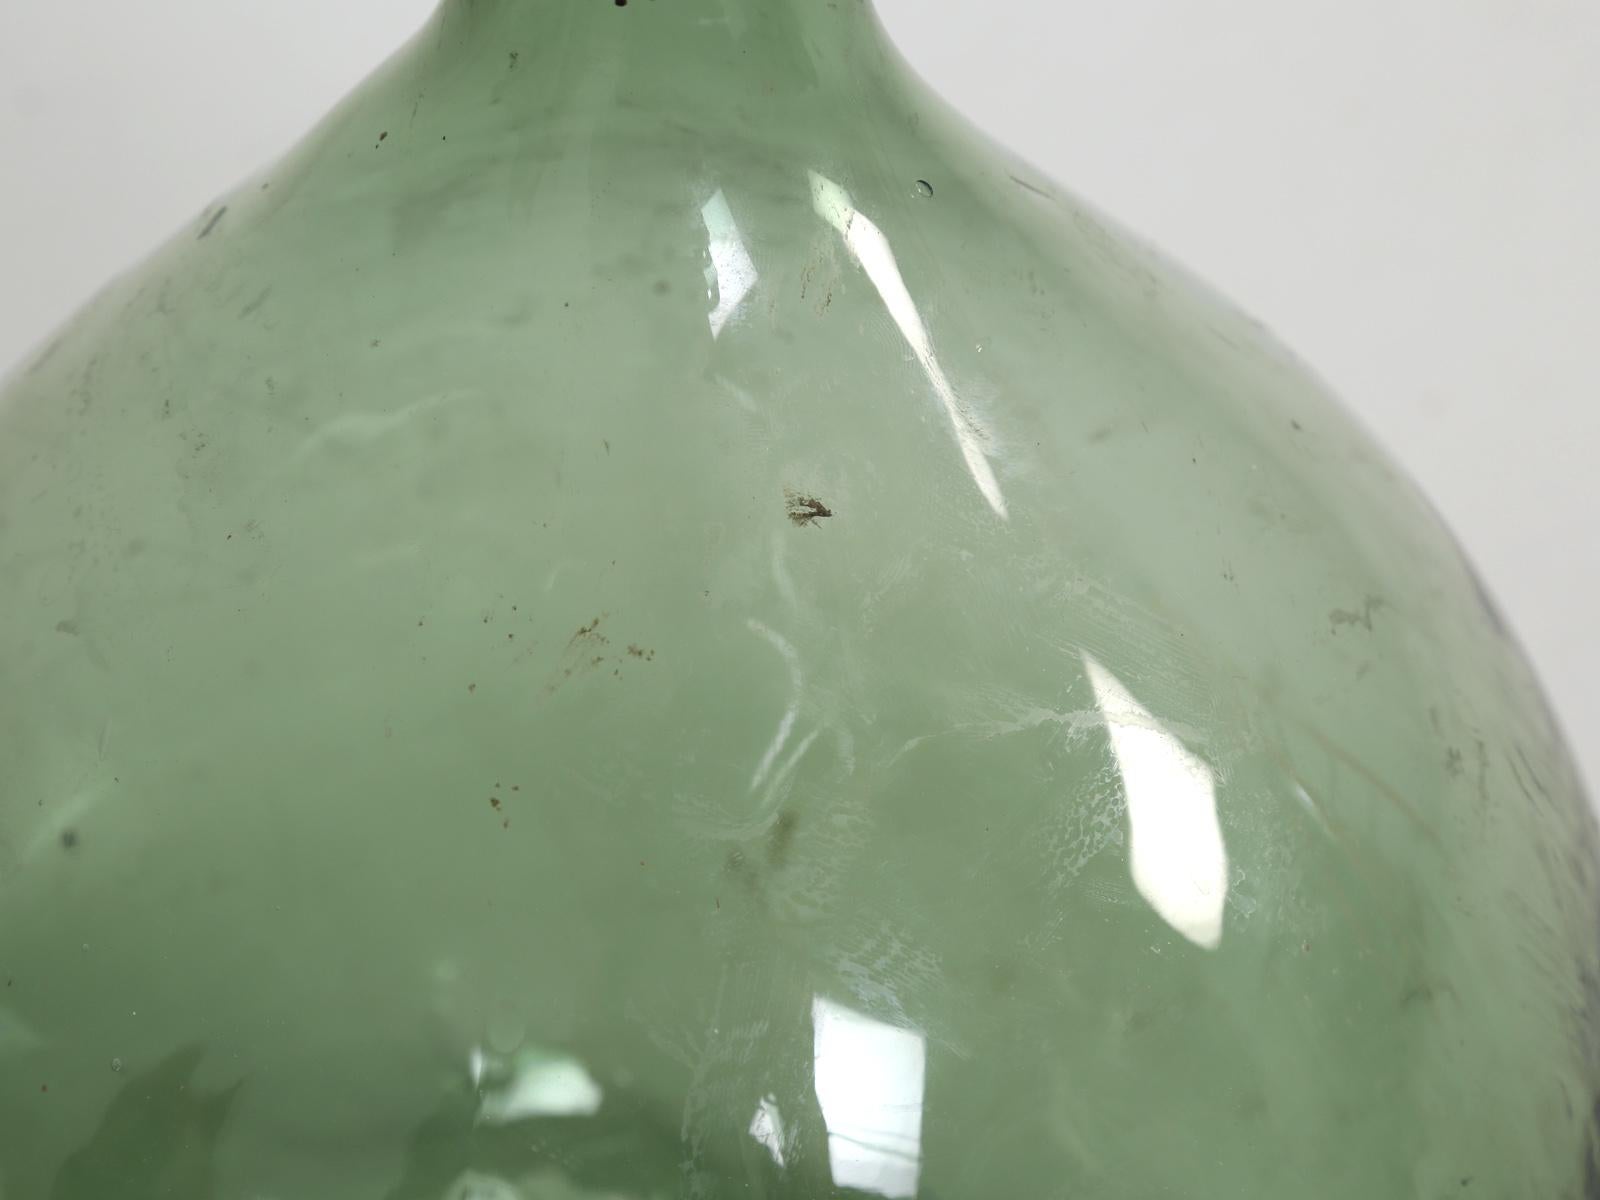 French Antique Demijohn, Carboy or Jimmyjohn